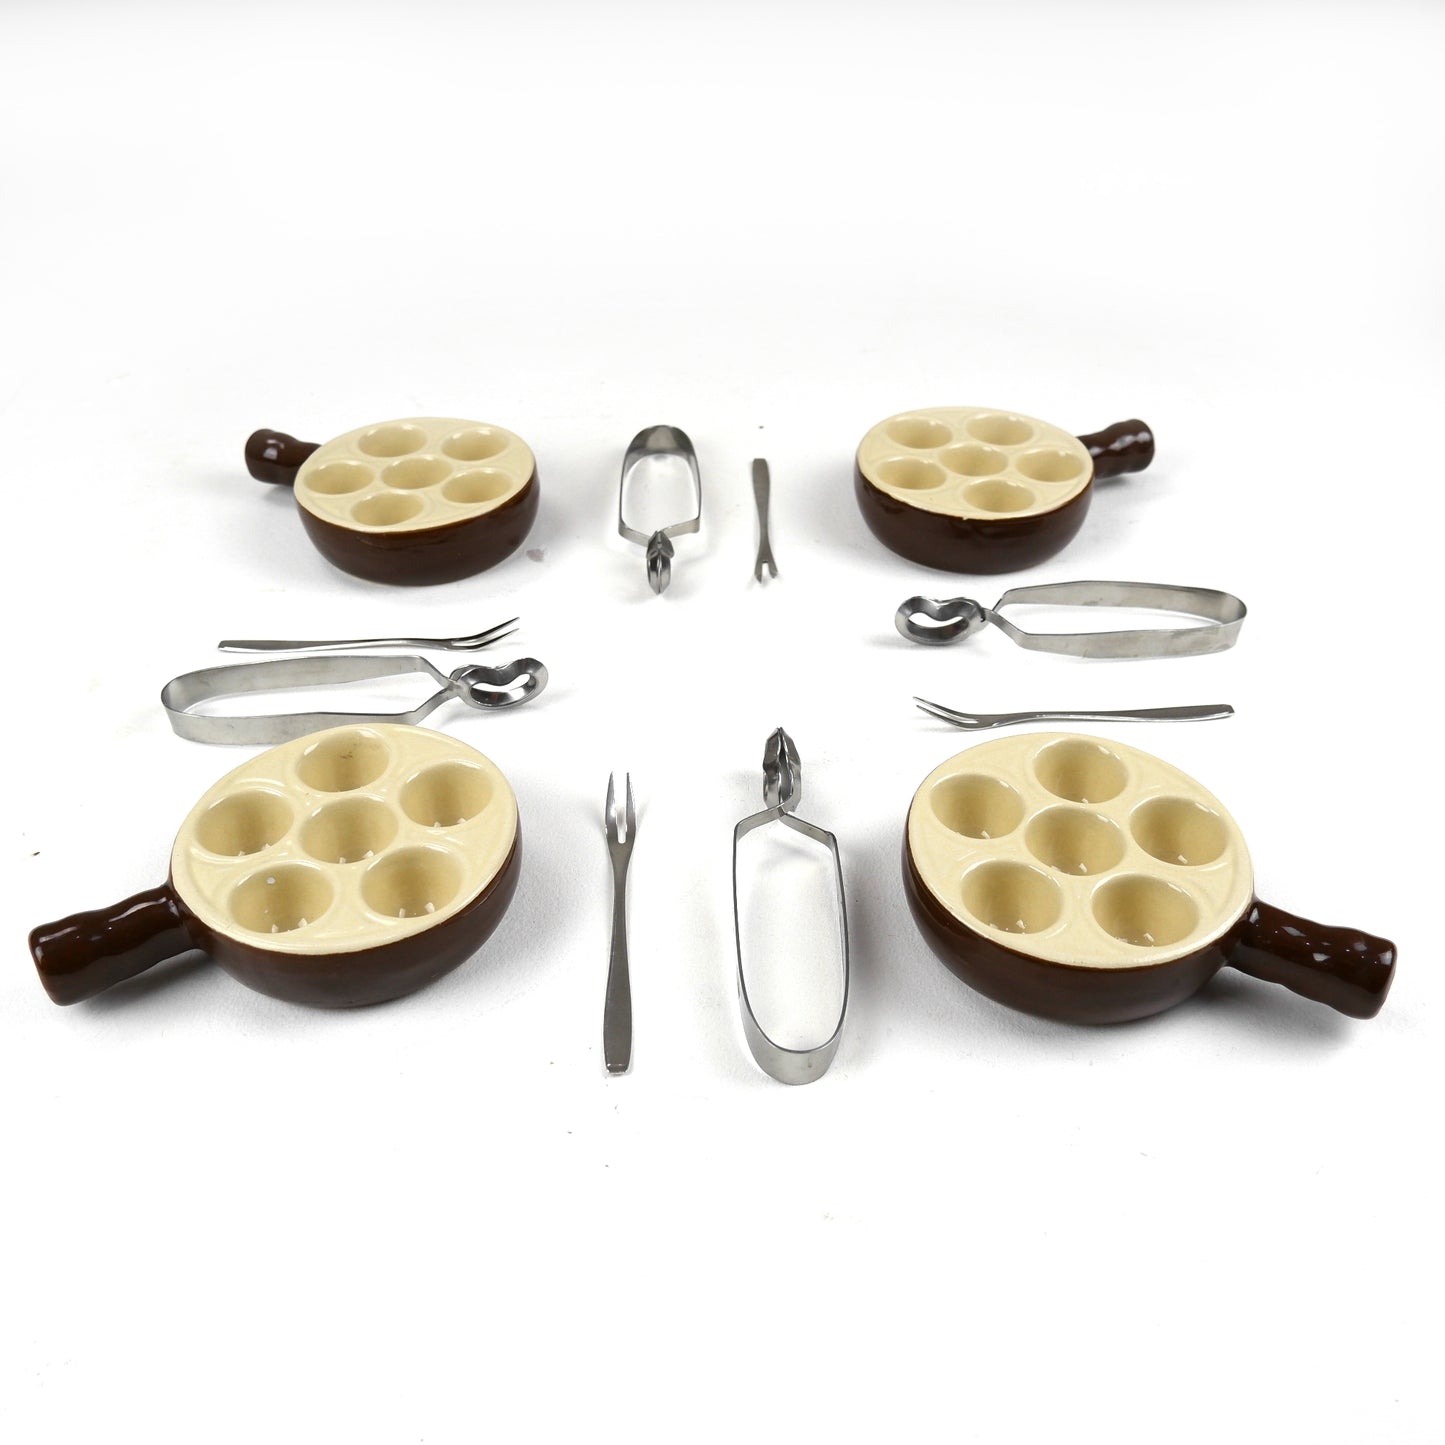 Vintage French EMILE HENRY Escargot Dishes with Snail Forks and Tongs - Mid Century Dining/Kitchen